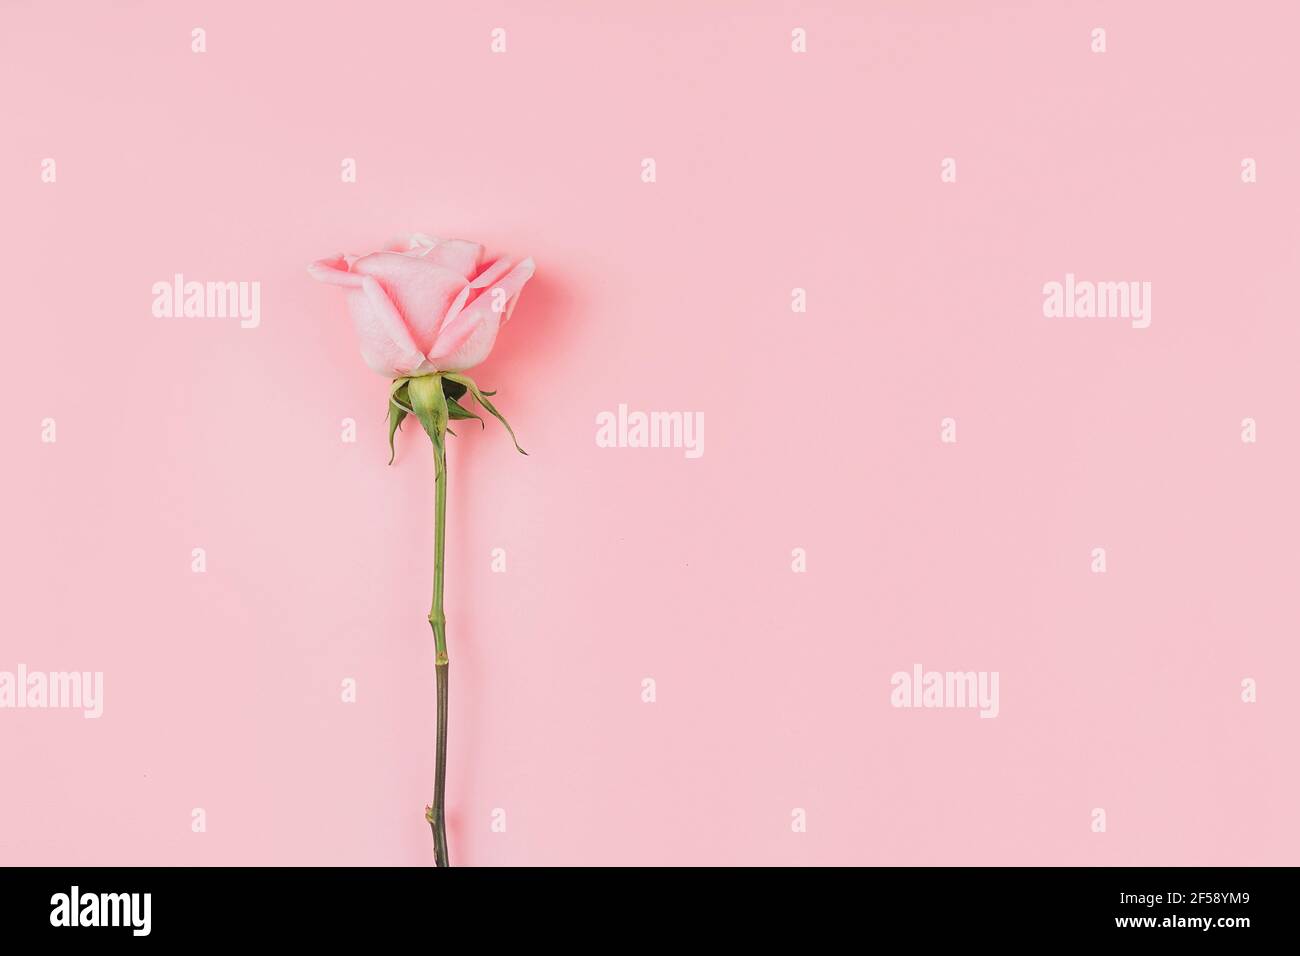 Beautiful rose against pink background. Free space for text. Stock Photo